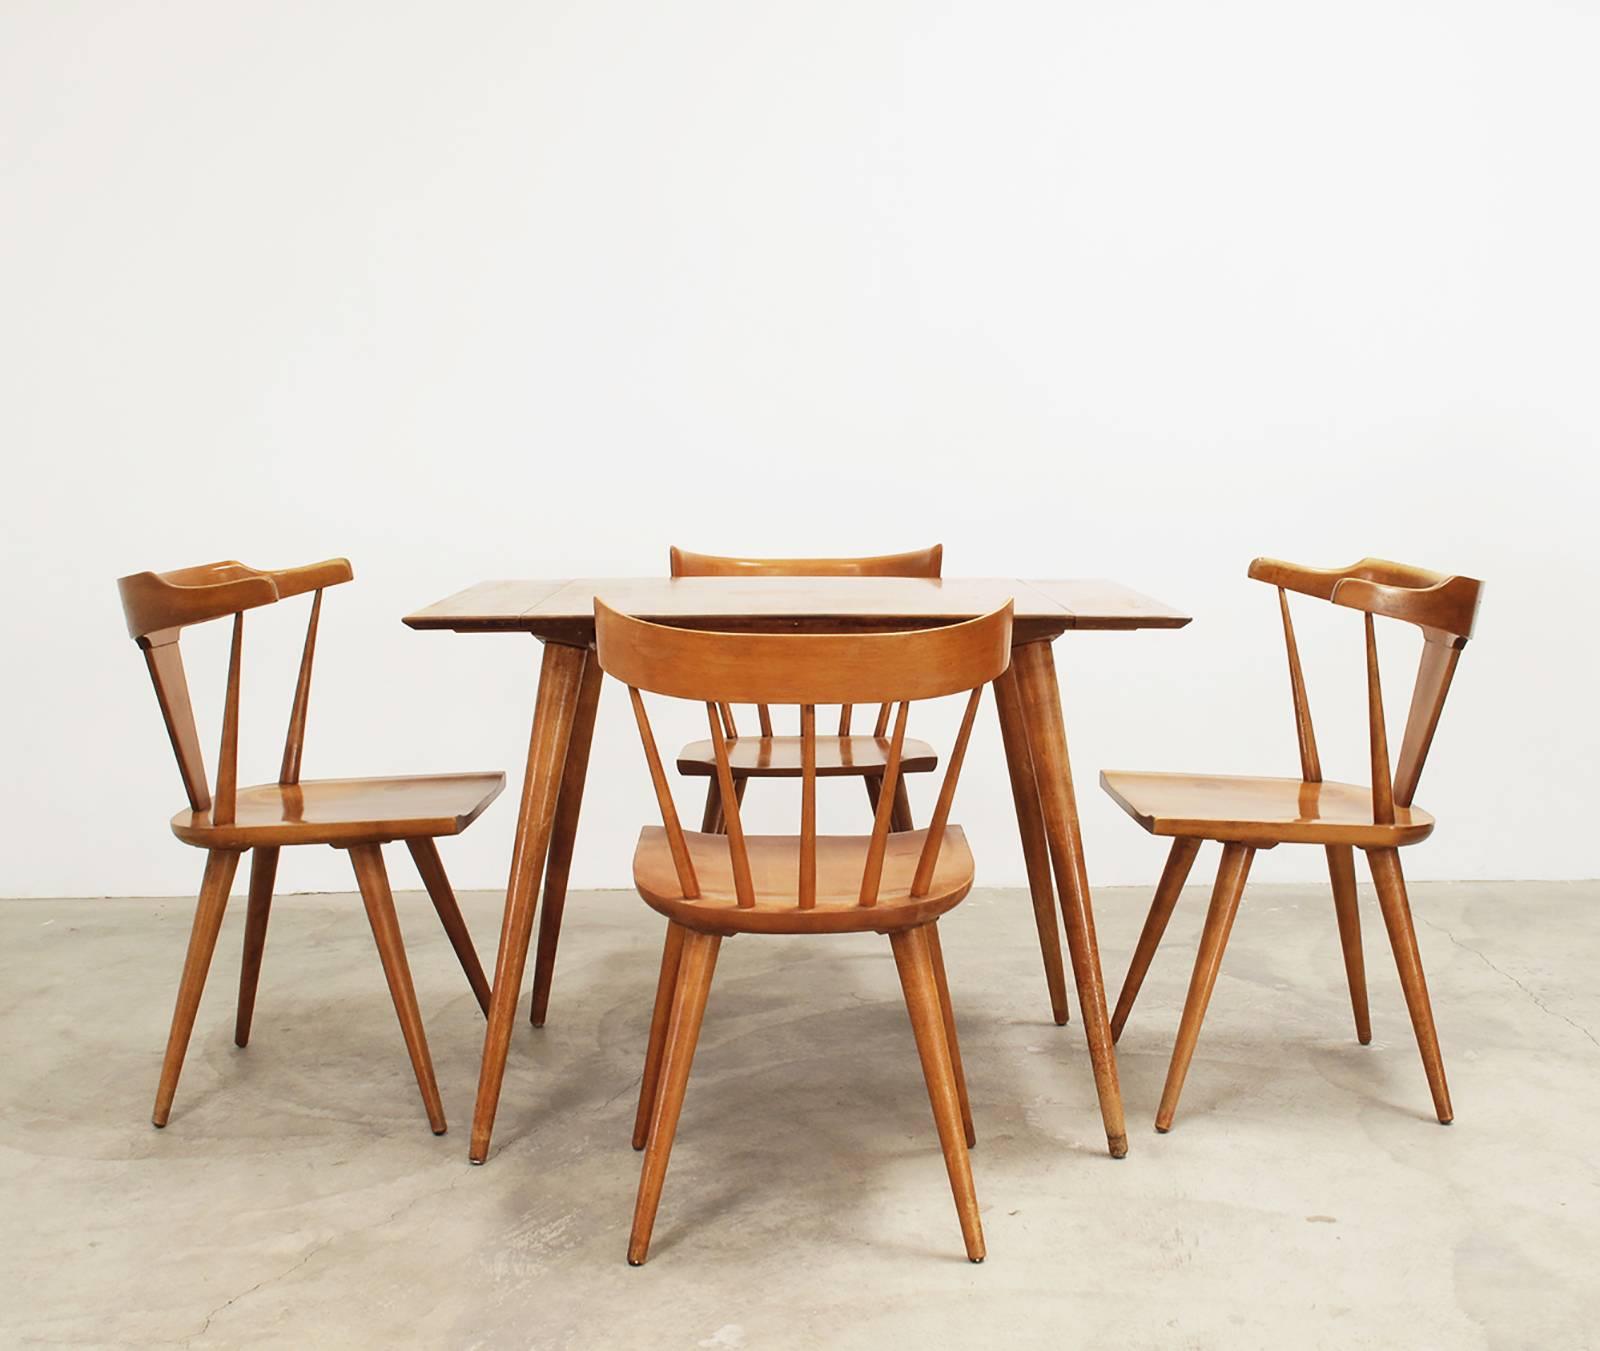 Vintage modern solid wood dinette set from the 'Planner Group' collection designed by Paul McCobb, 1950s, dimensions of chairs: 31 high x 19.5 wide x 19.5 deep, 17.5 seat height inches, dimensions of table with both leaves: 29 high x 60.5 wide x 30